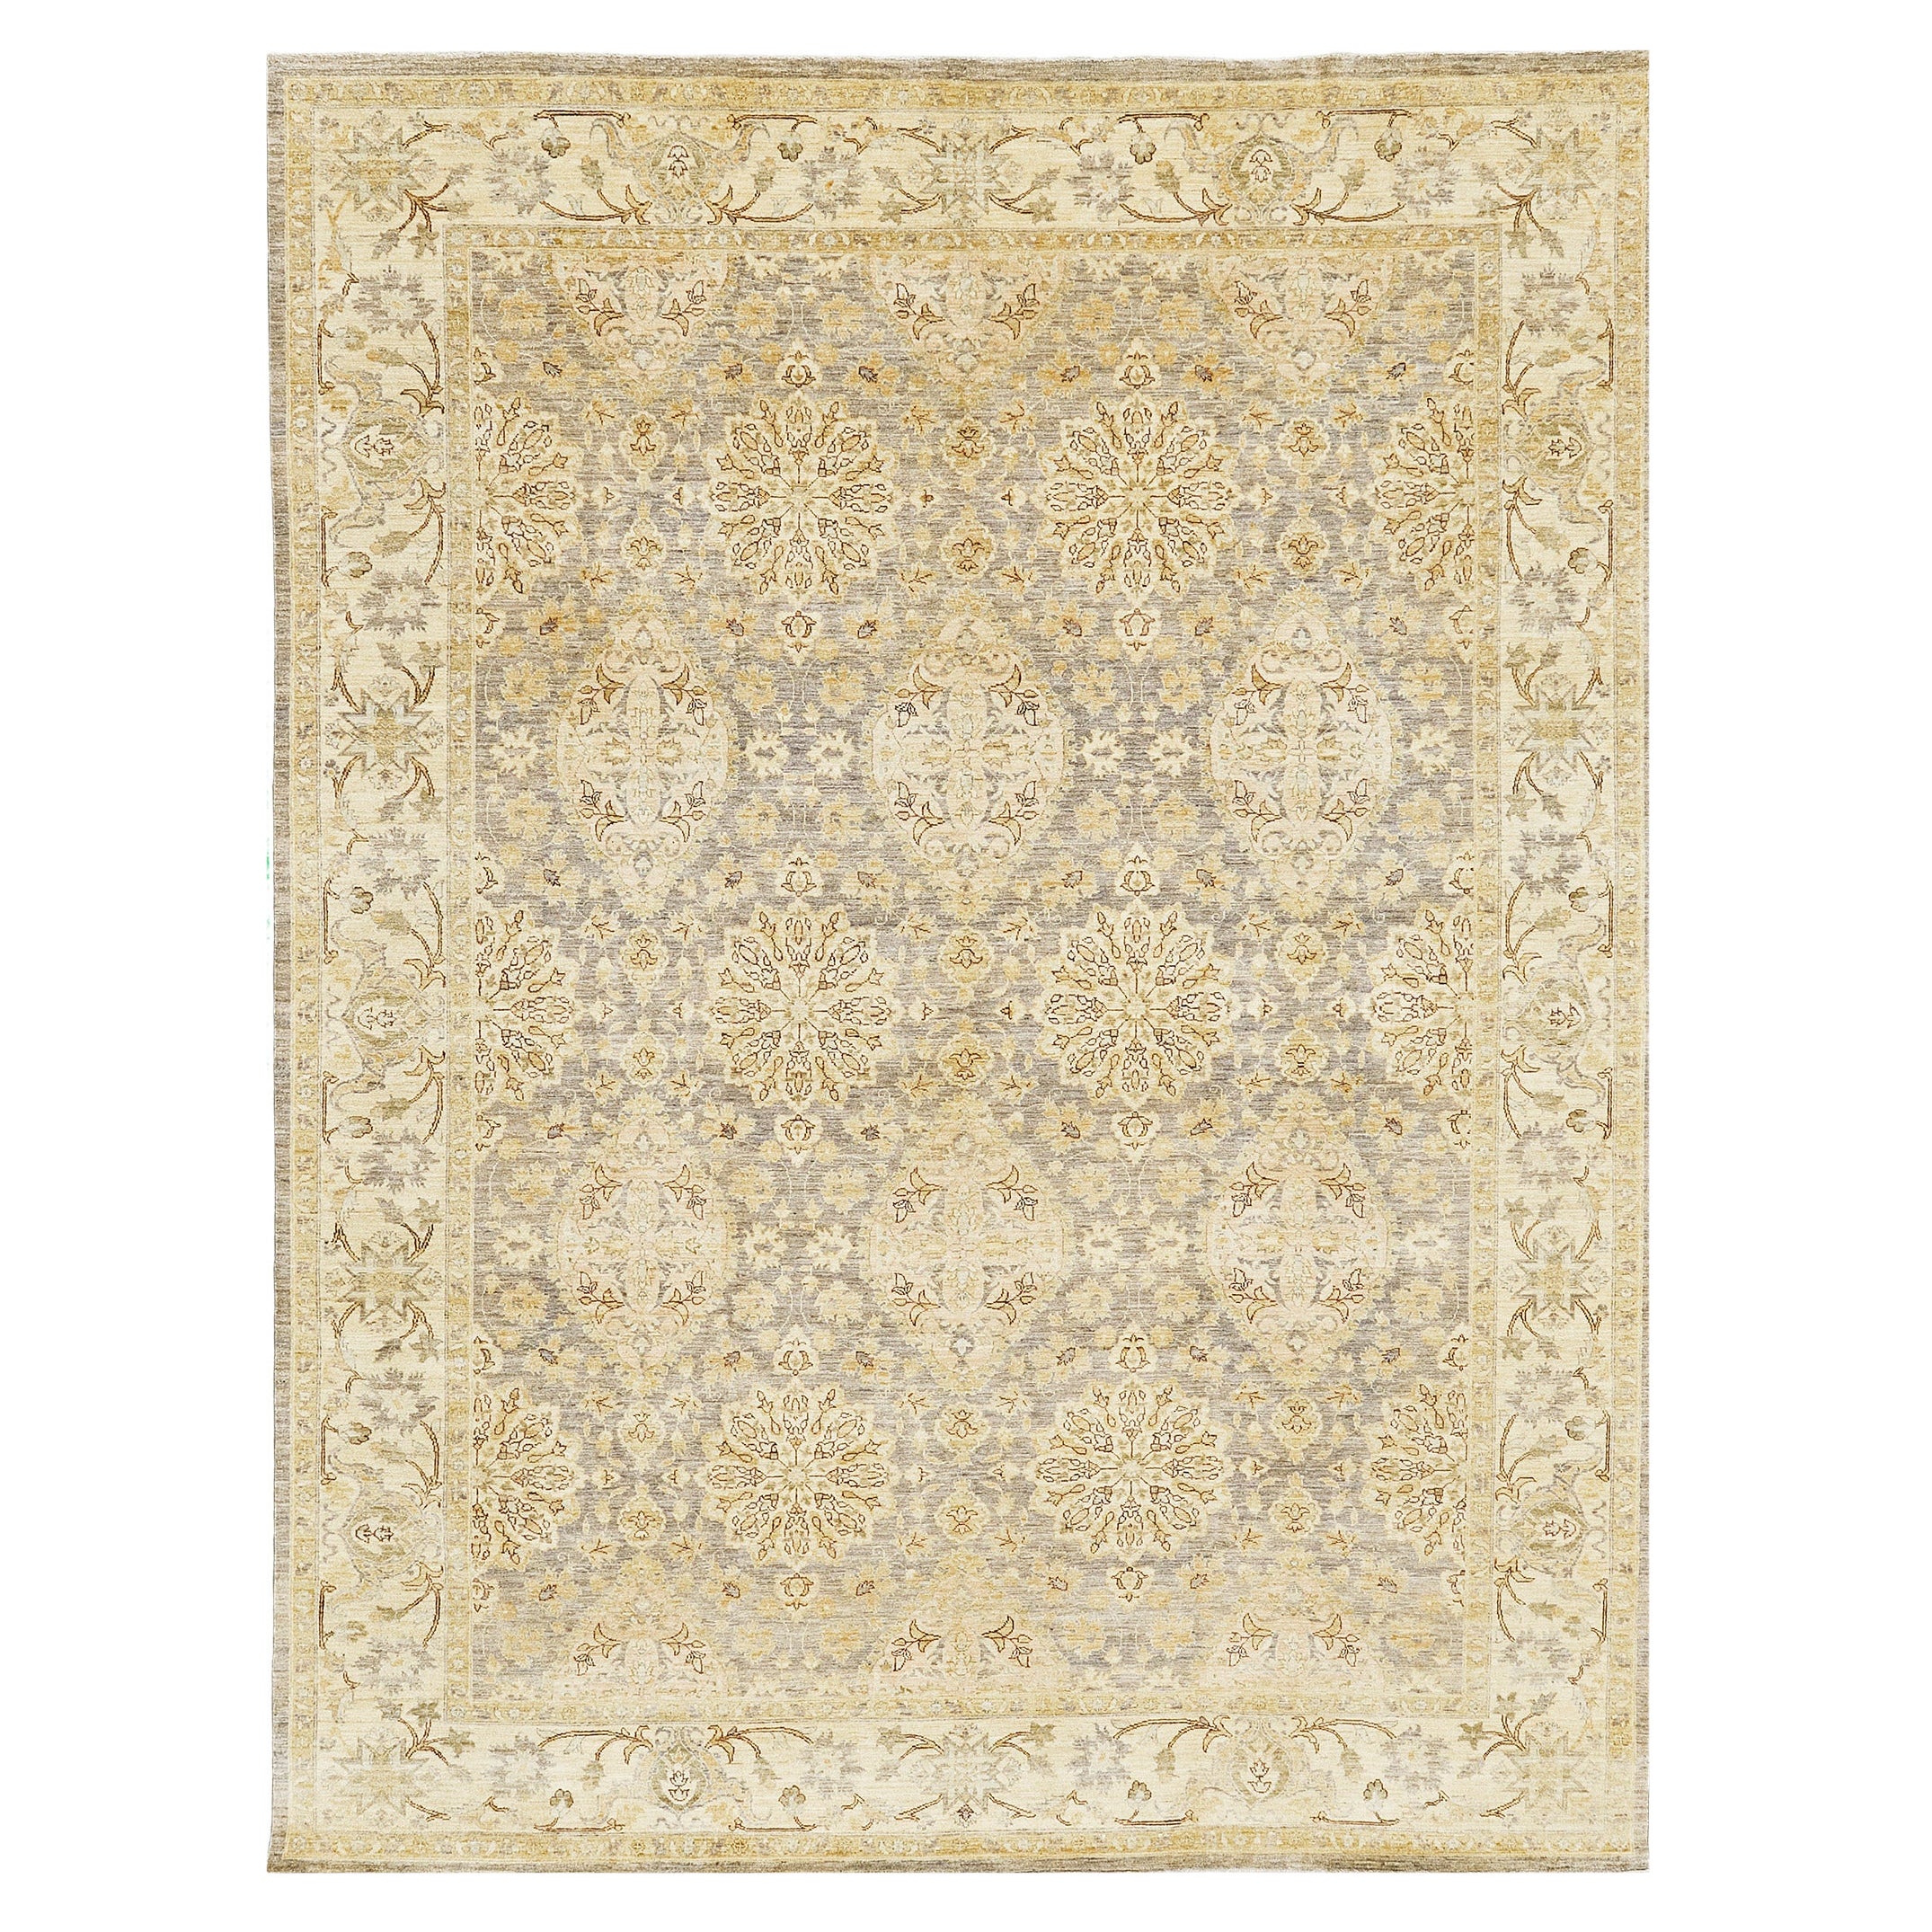 Natural Dye Agra Design Rug Bliss Collection D5556 For Sale